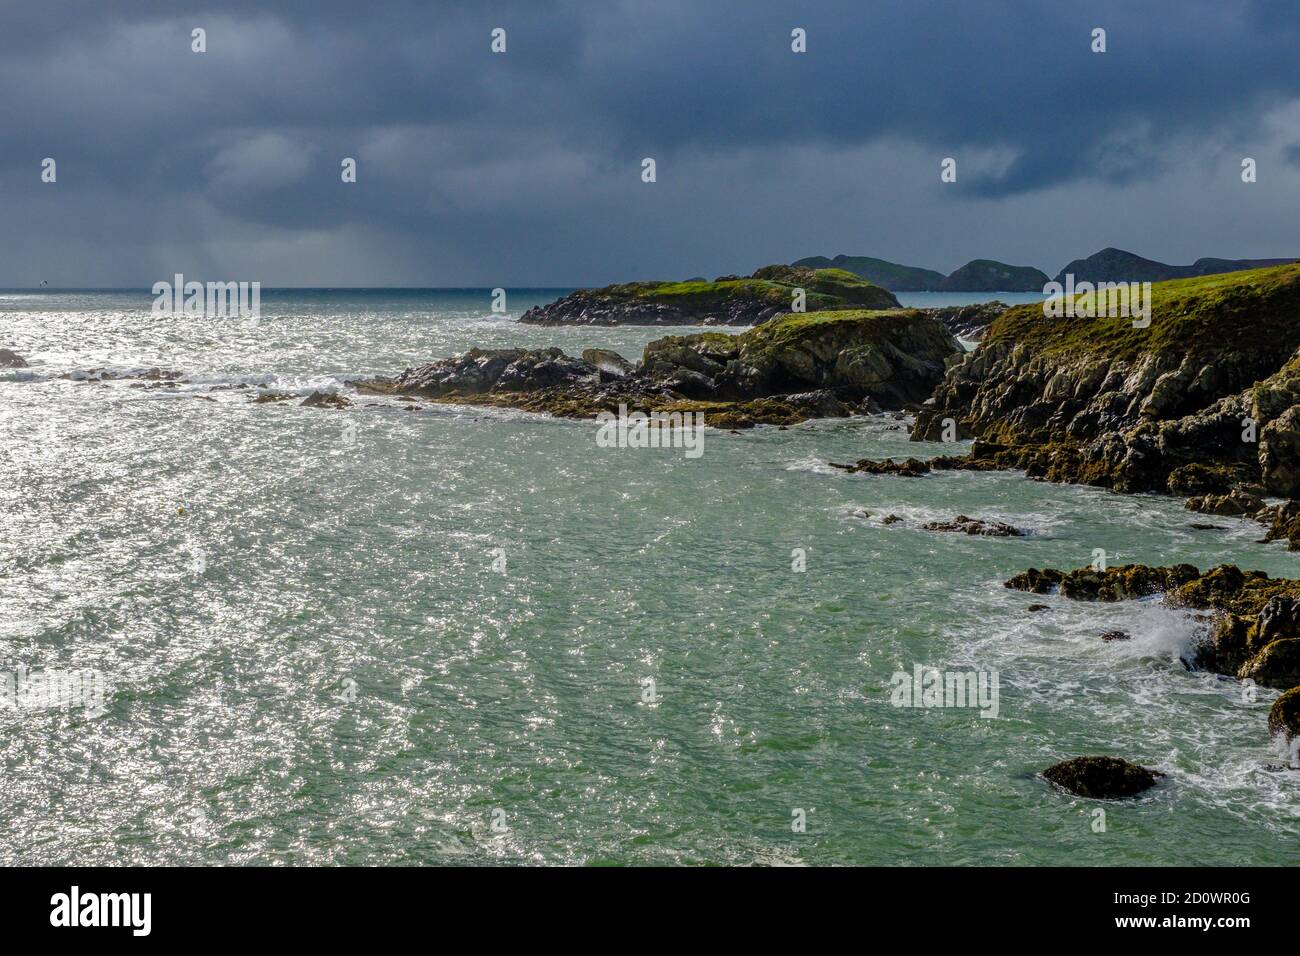 Brooding, stormy sky over the sea and the coastline around St Davids in the Pembrokeshire Coast National Park, Wales,UK Stock Photo